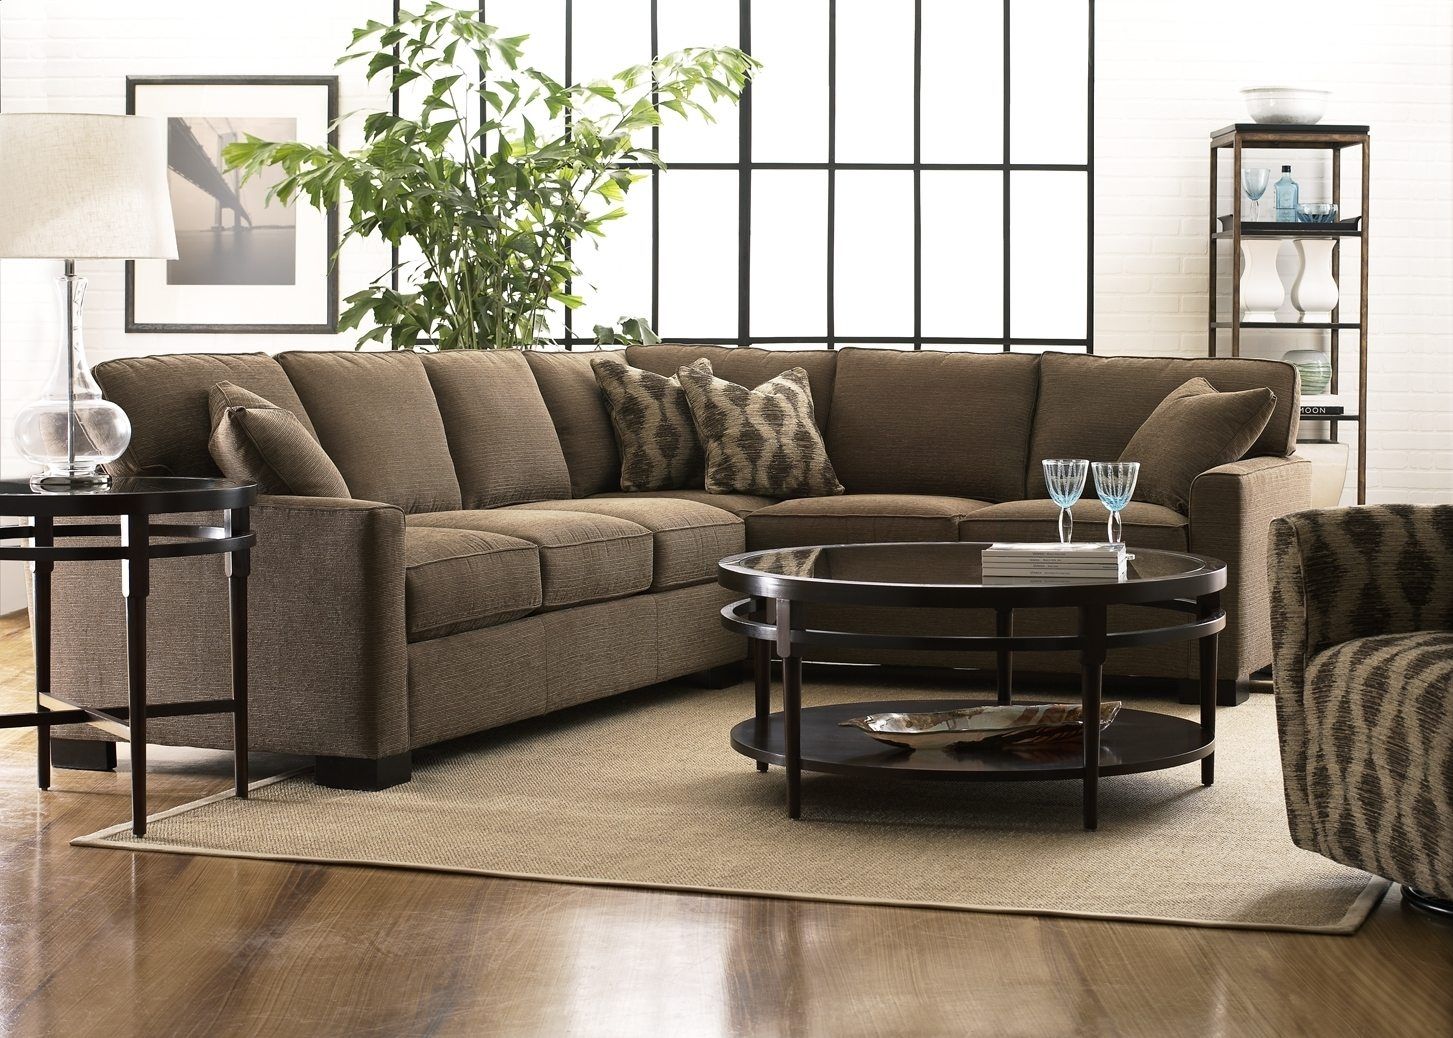 Sectional Sofas Edmonton Hotelsbacau With Regard To Closeout Sectional Sofas (View 11 of 12)